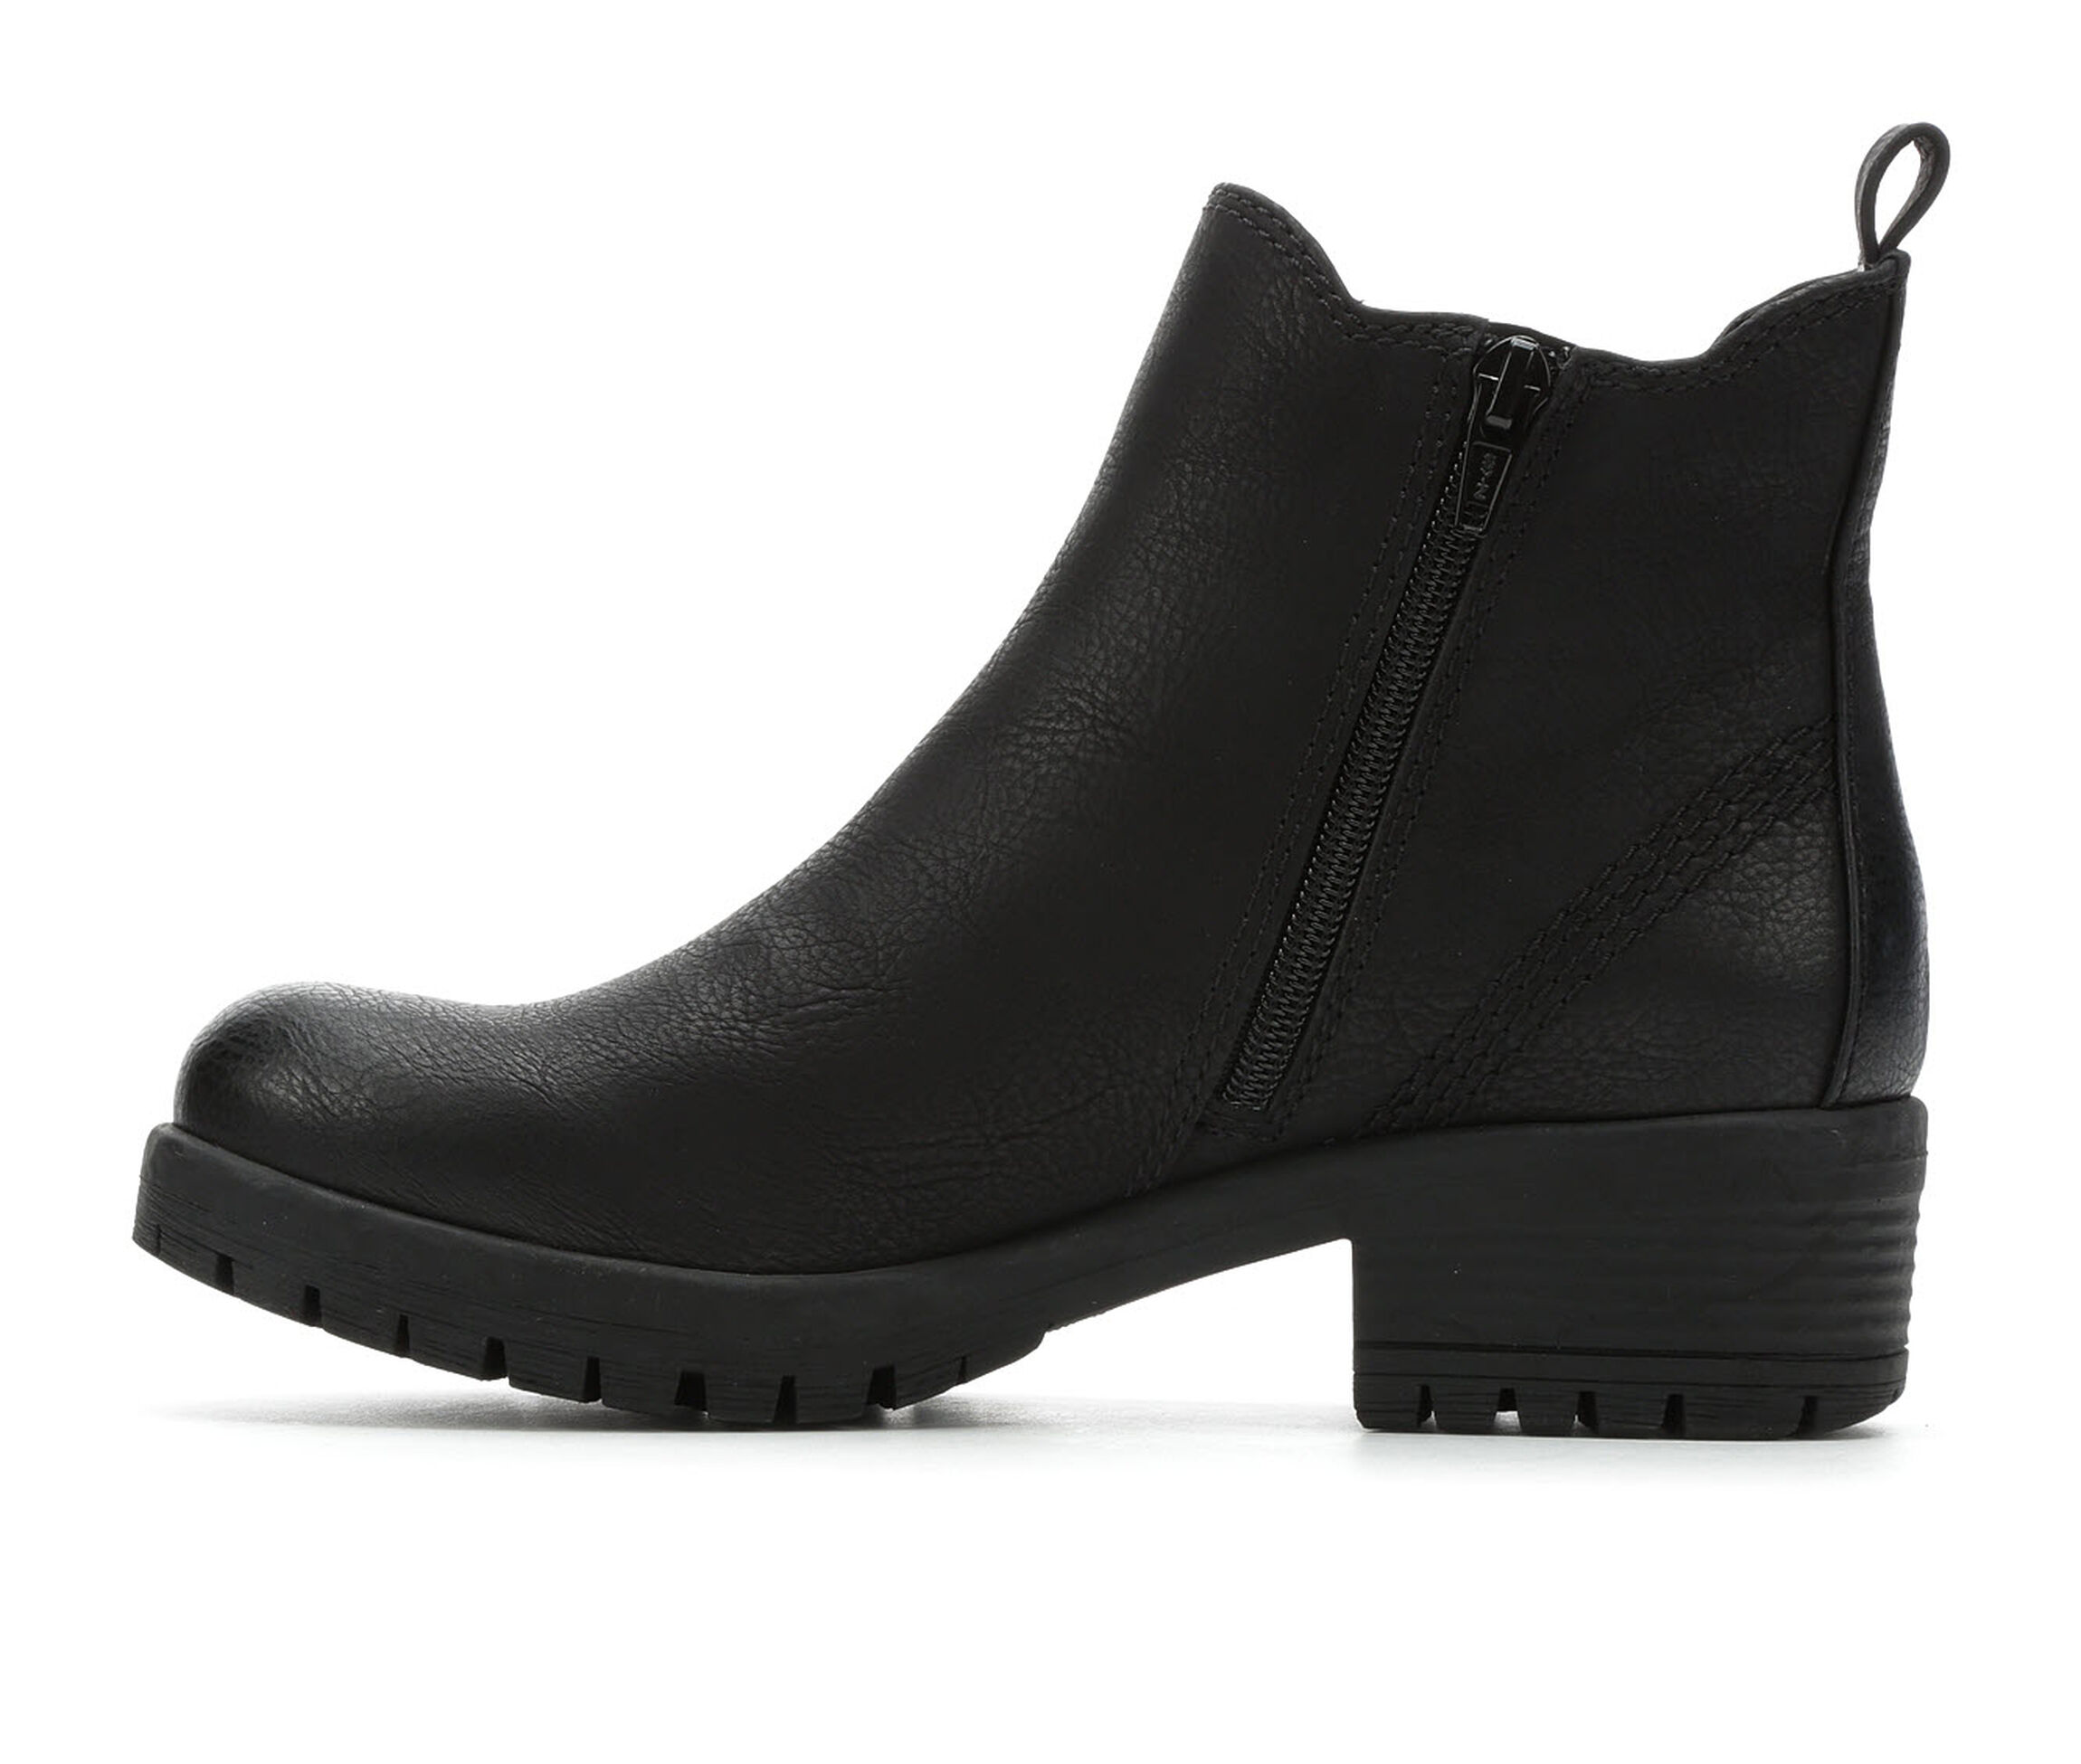 Women's Ankle Boots and Booties